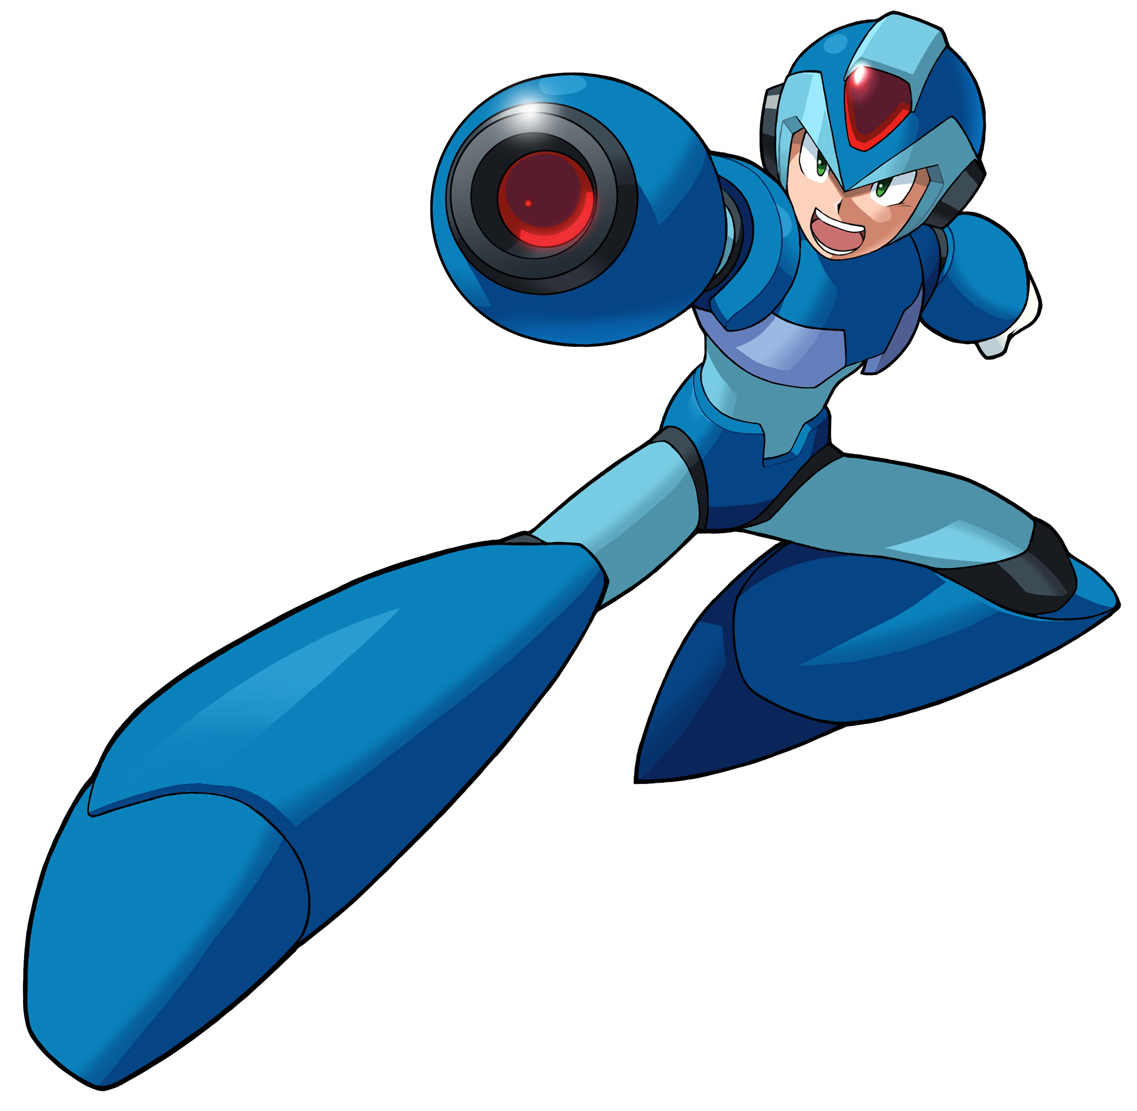 capcom-in-the-news-rooster-teeth-on-mega-man-darkstalkers-contest-and-the-alpha-revival